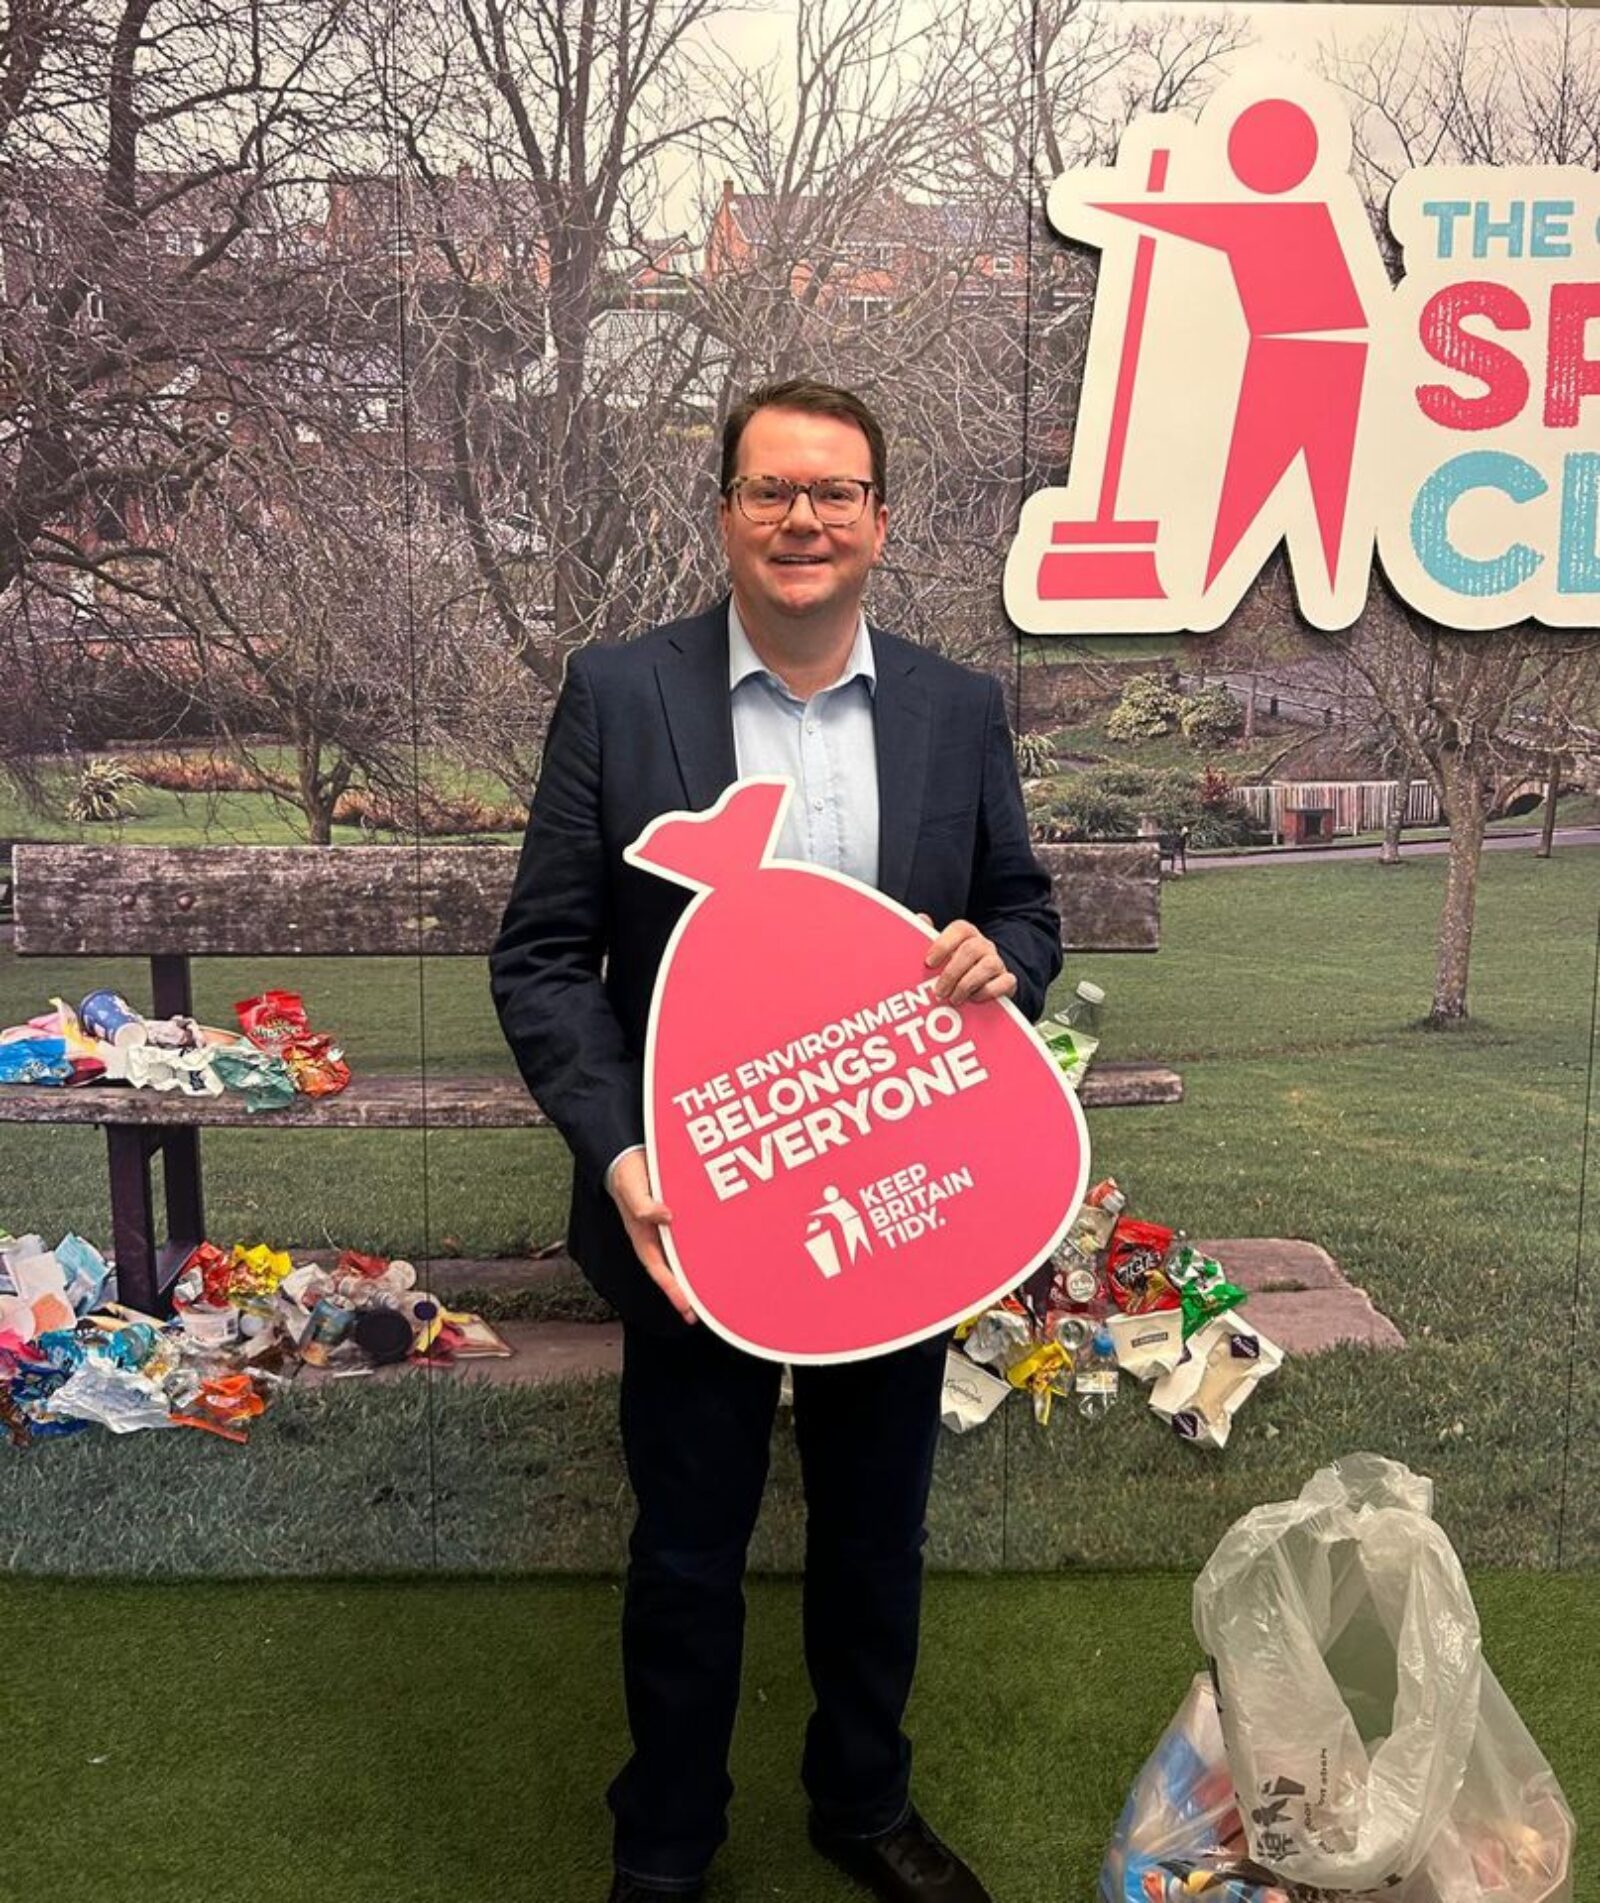 Conor McGinn MP pictured holding sign saying "the environment belongs to everyone. Keep Britain tidy"